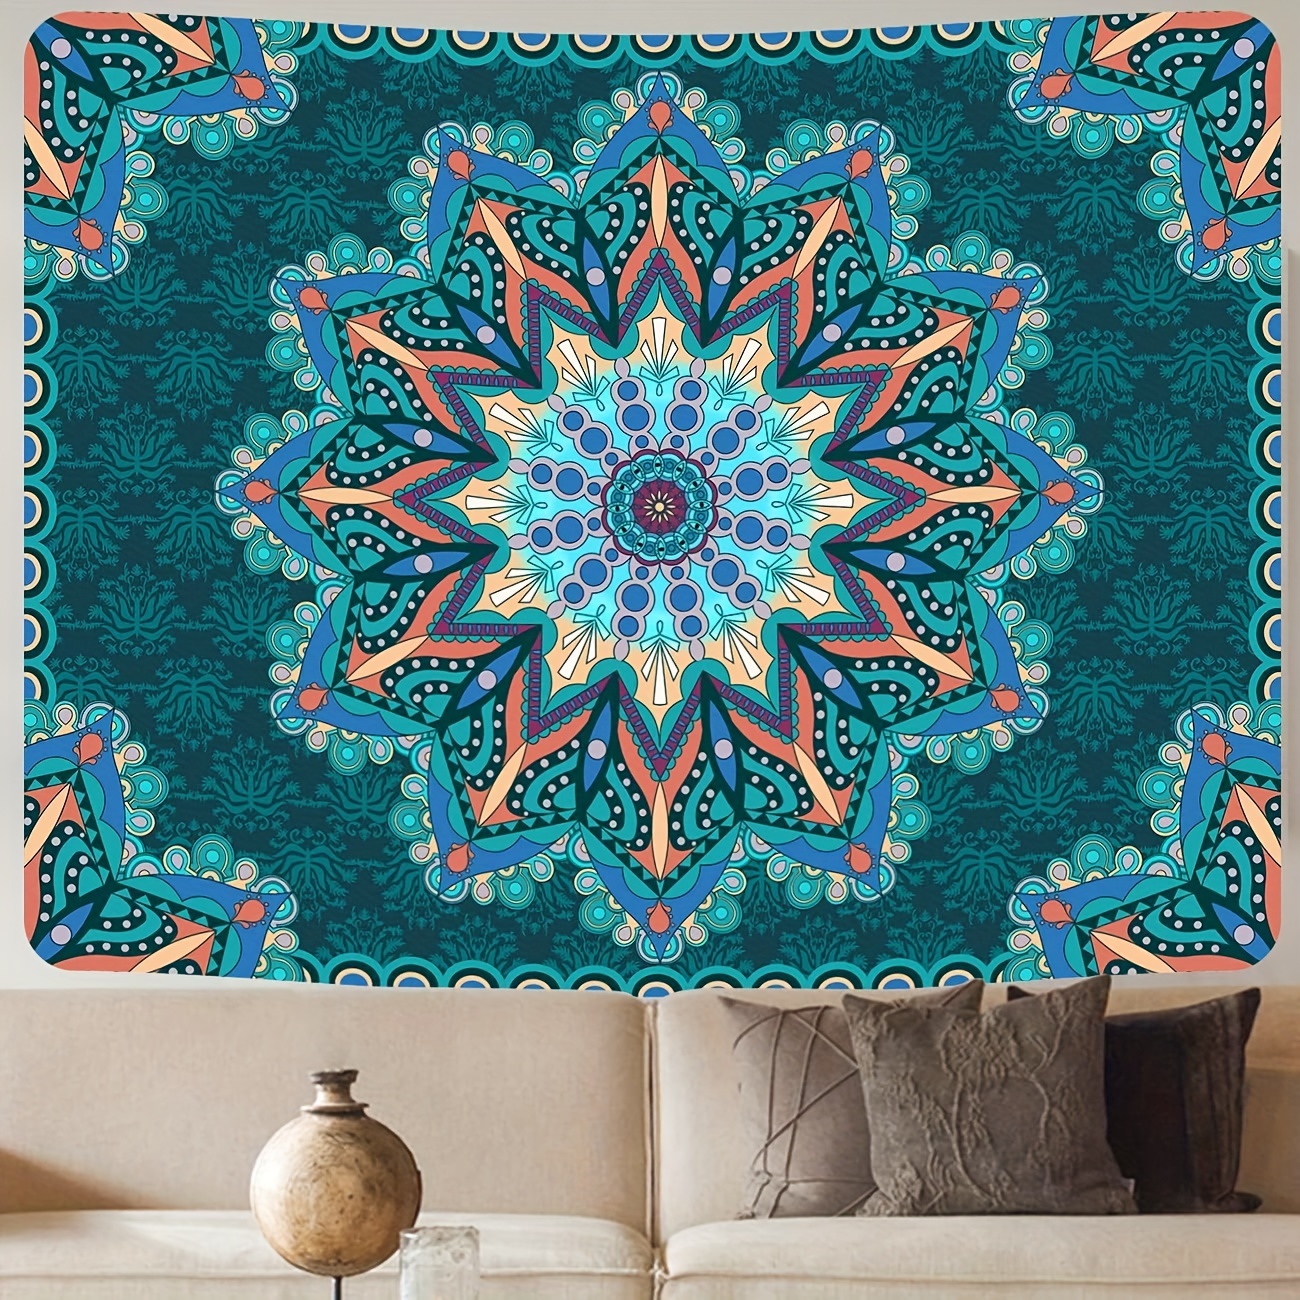 

1pc Bohemian Mandala Tapestry, Polyester Tapestry, Wall Hanging For Living Room Bedroom Office, Home Decor Room Decor Party Decor, With Free Installation Package